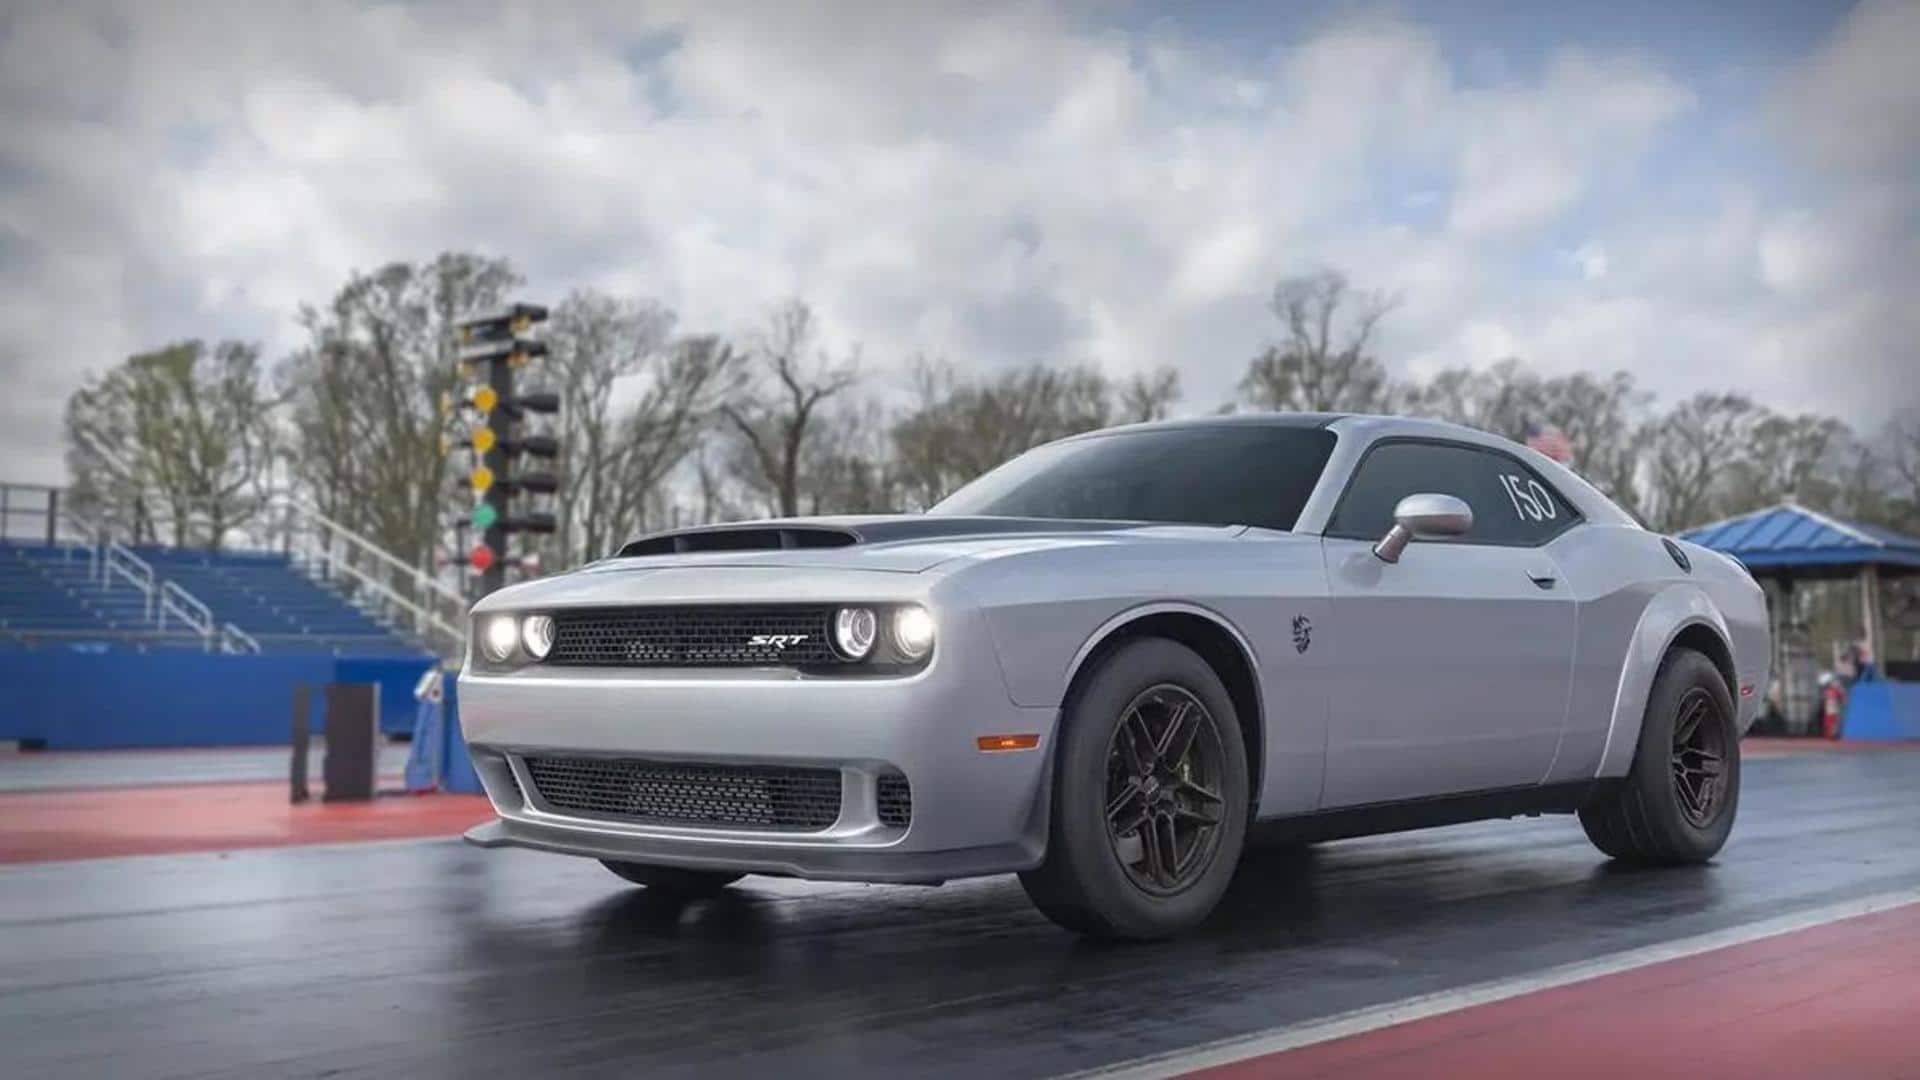 Features of track-ready 2023 Dodge Challenger SRT Demon 170 explained